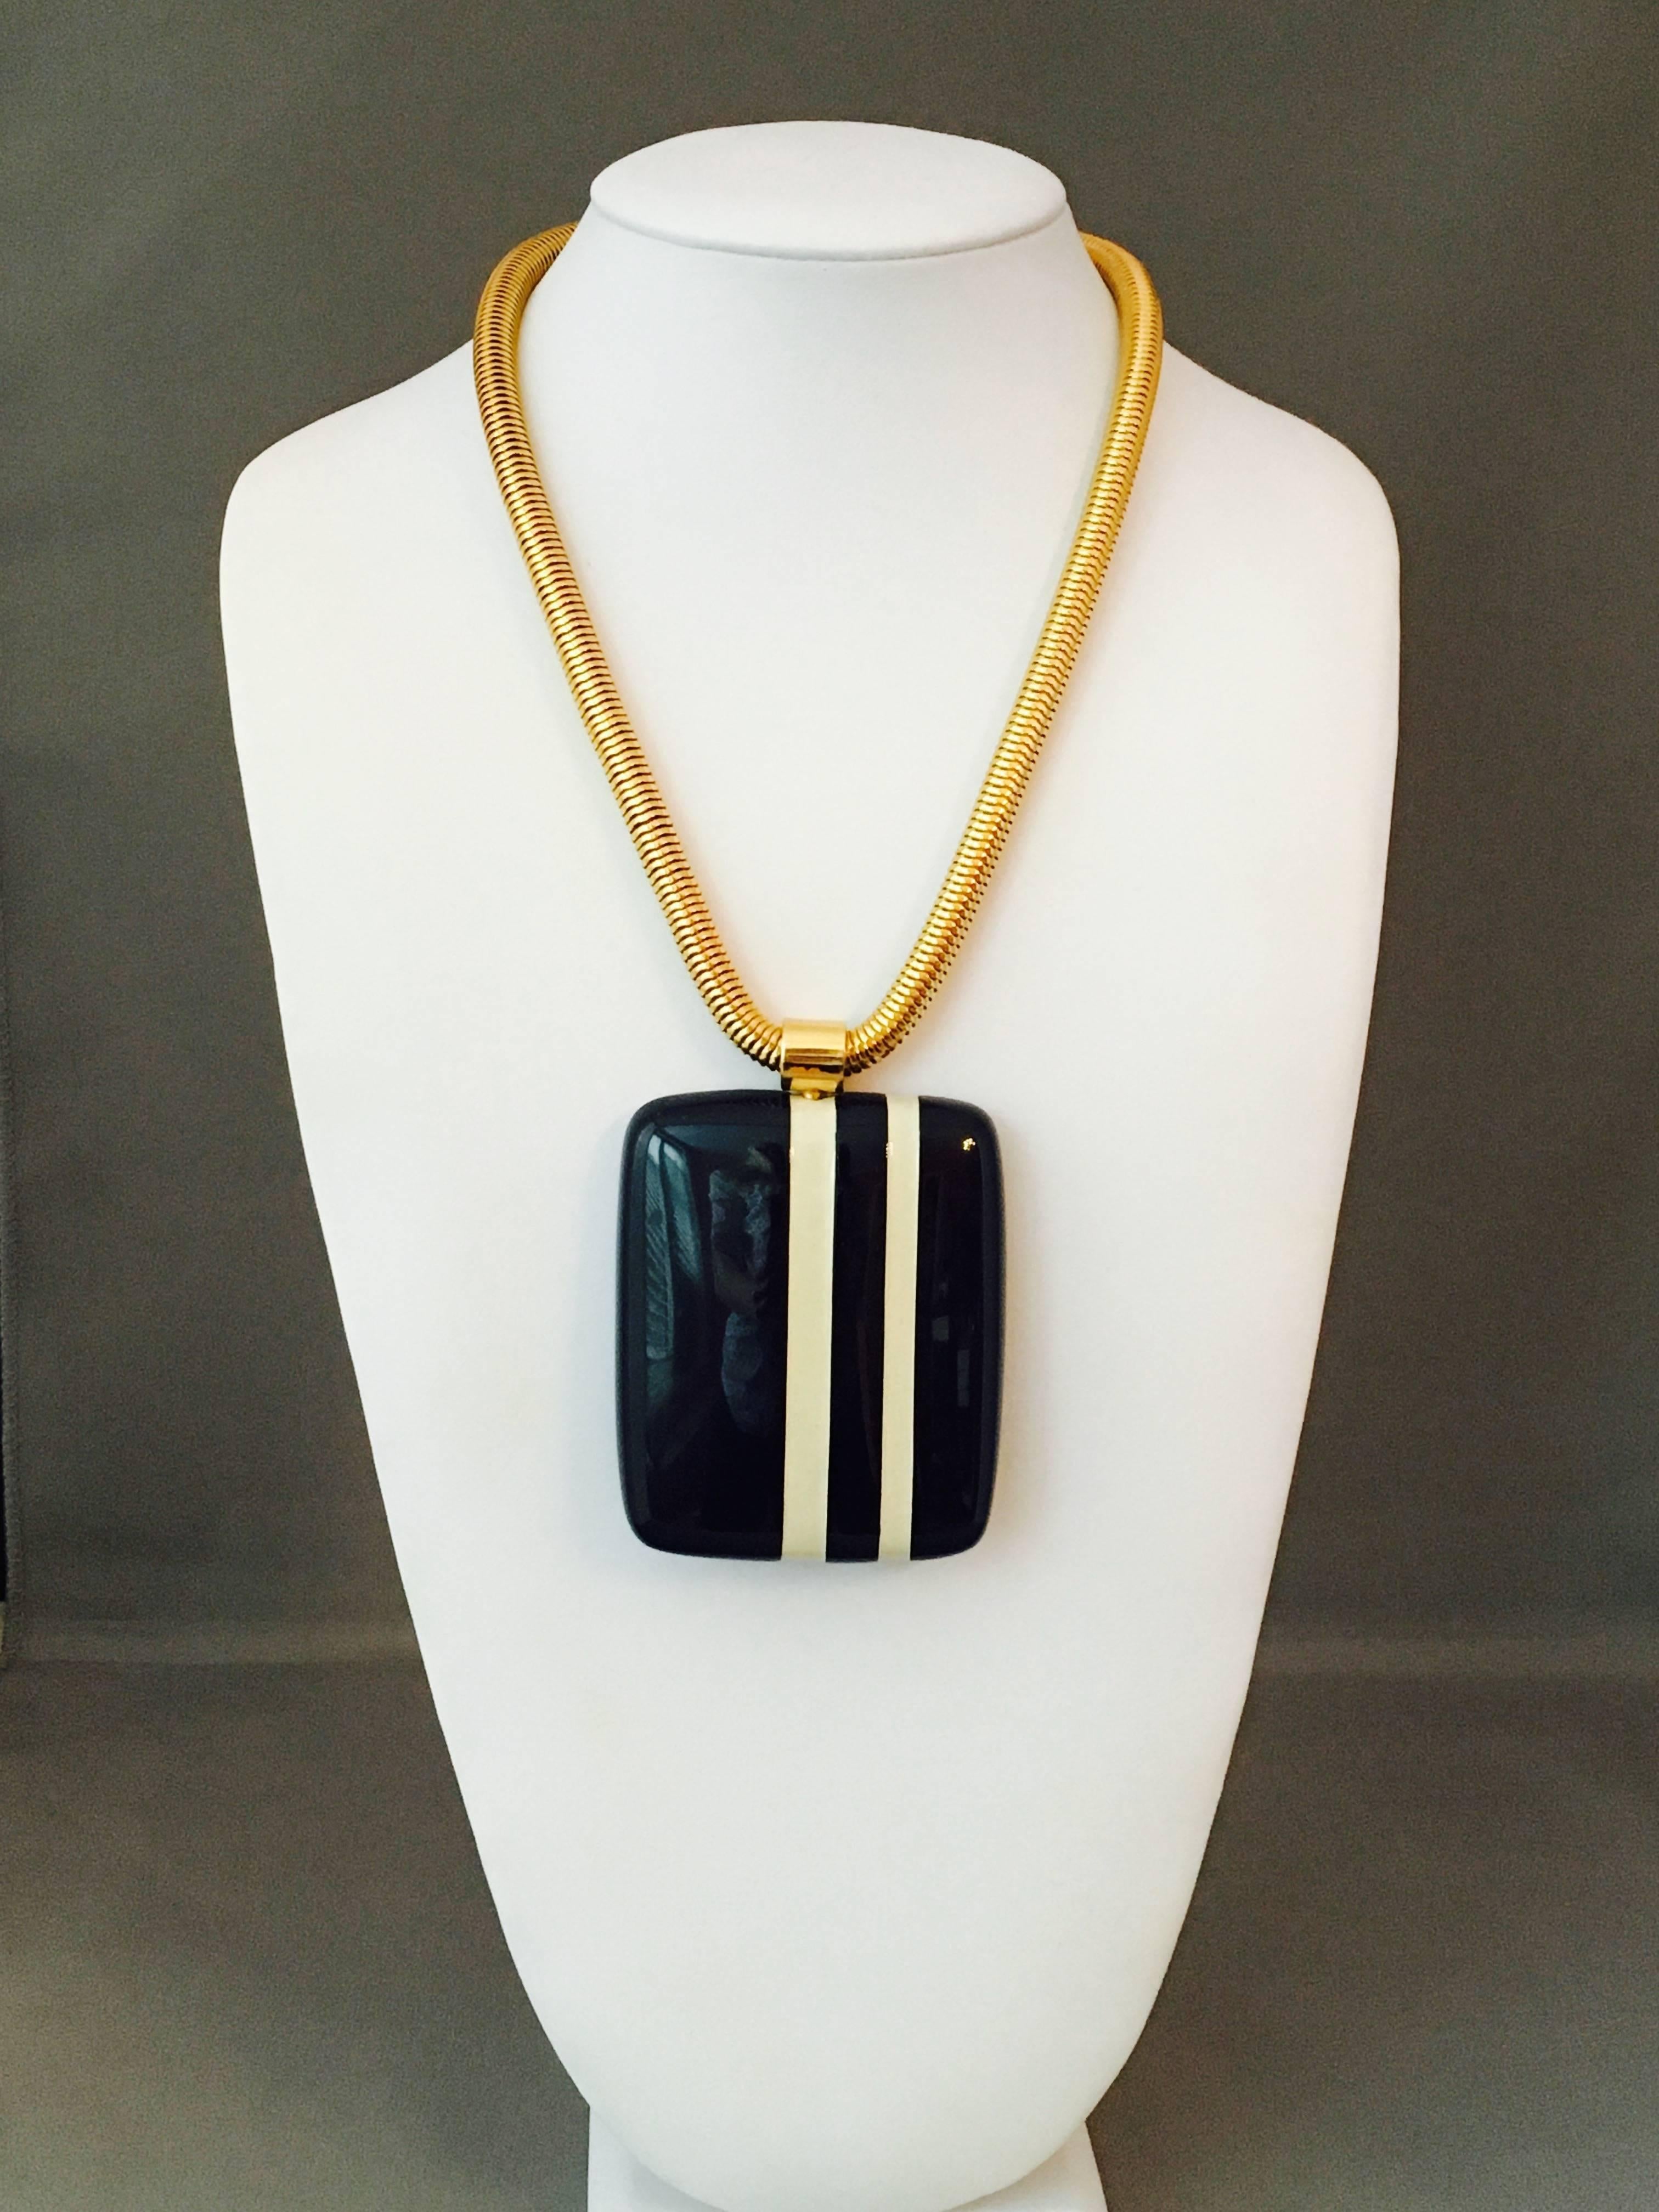 Lanvin Navy and White Striped Pendant Necklace, 1970s For Sale 1